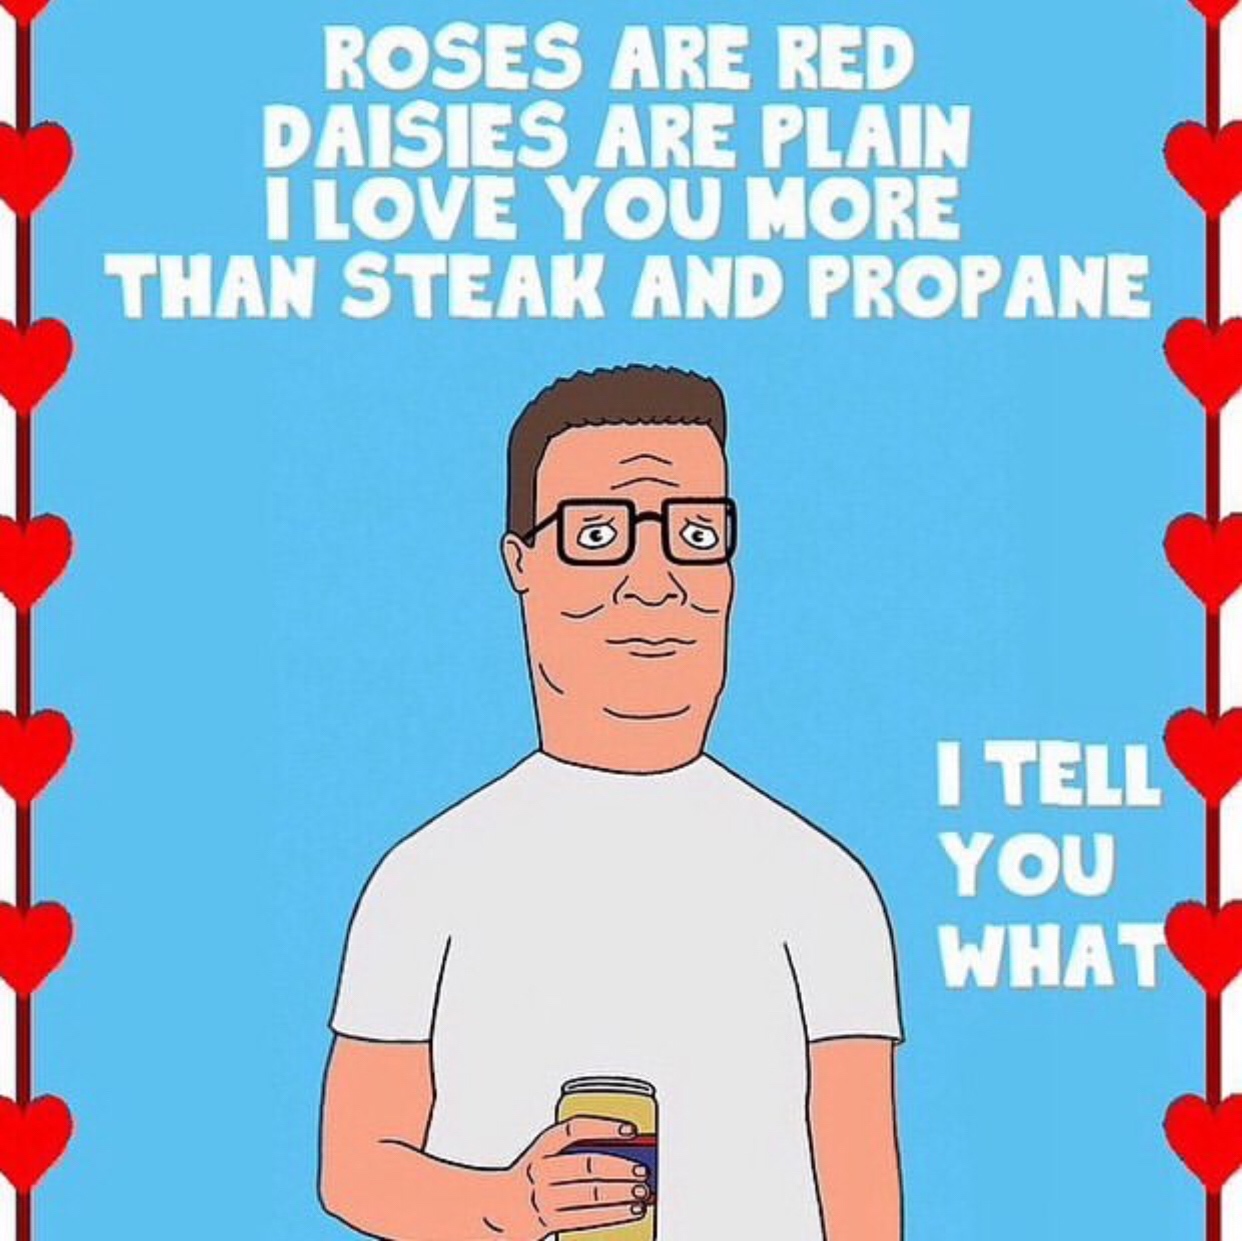 king of the hill i love you - Roses Are Red Daisies Are Plain I Love You More Than Steak And Propane I Tell You What